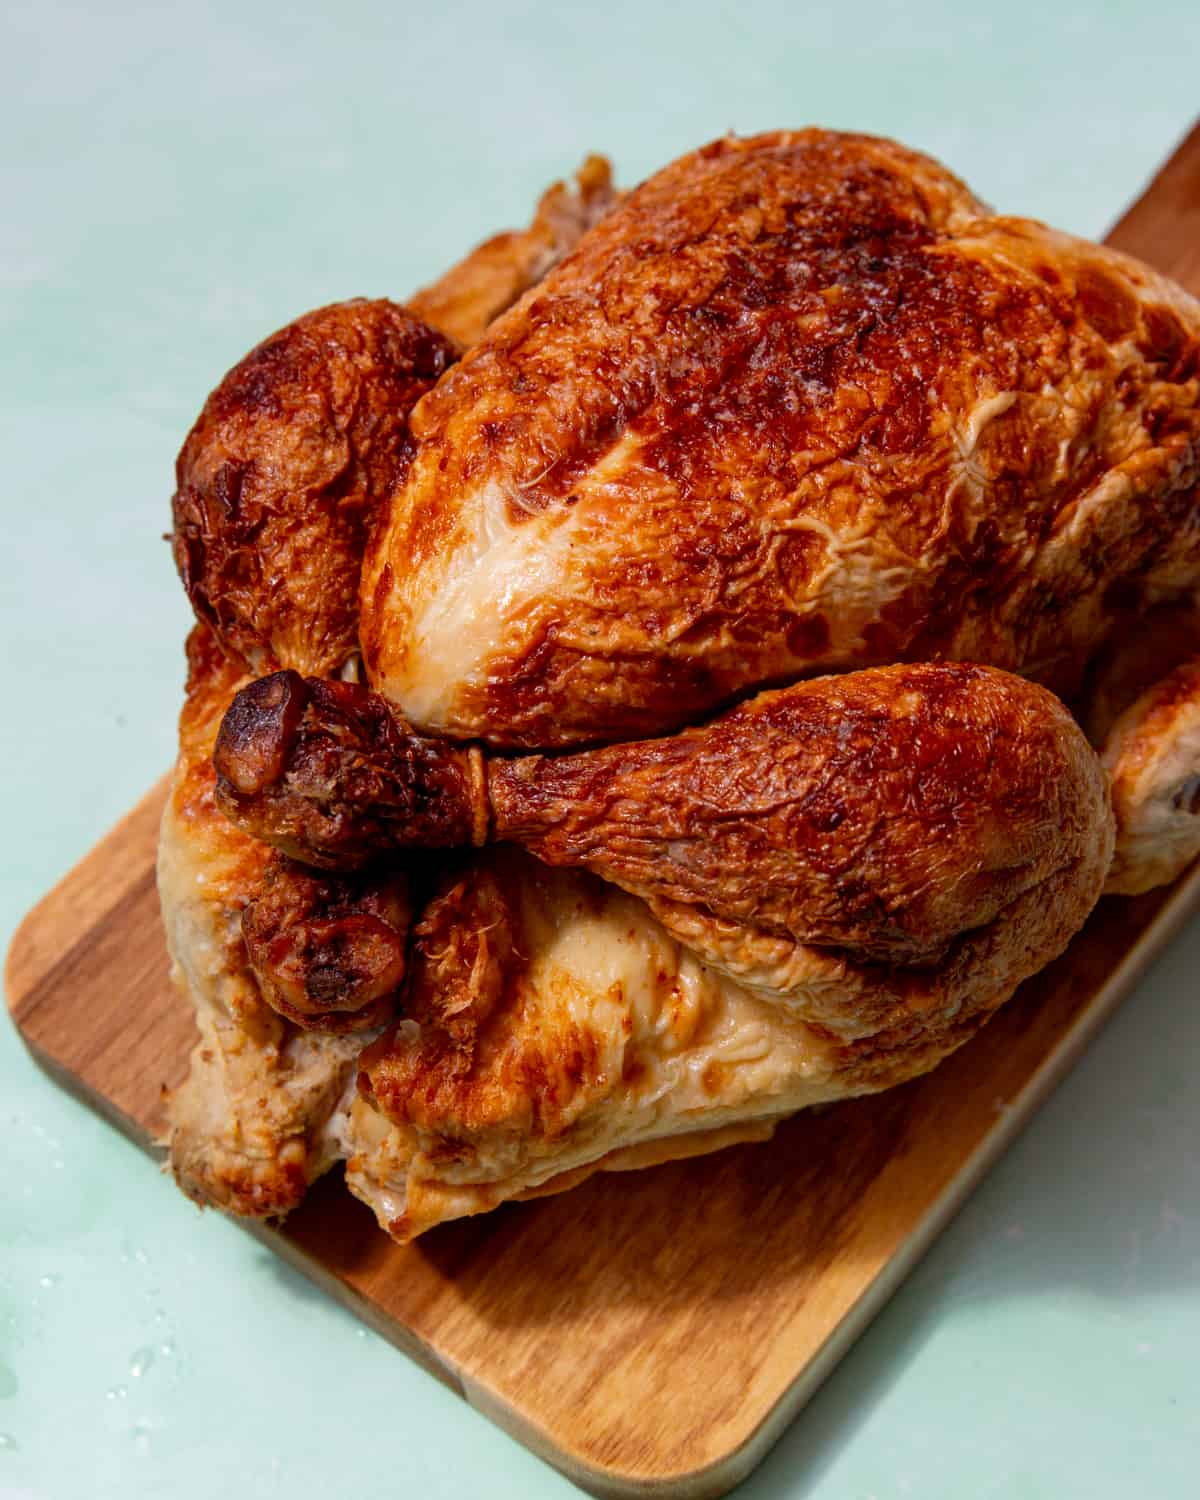 Large golden browned whole chicken on a wooden board on a pale green background.